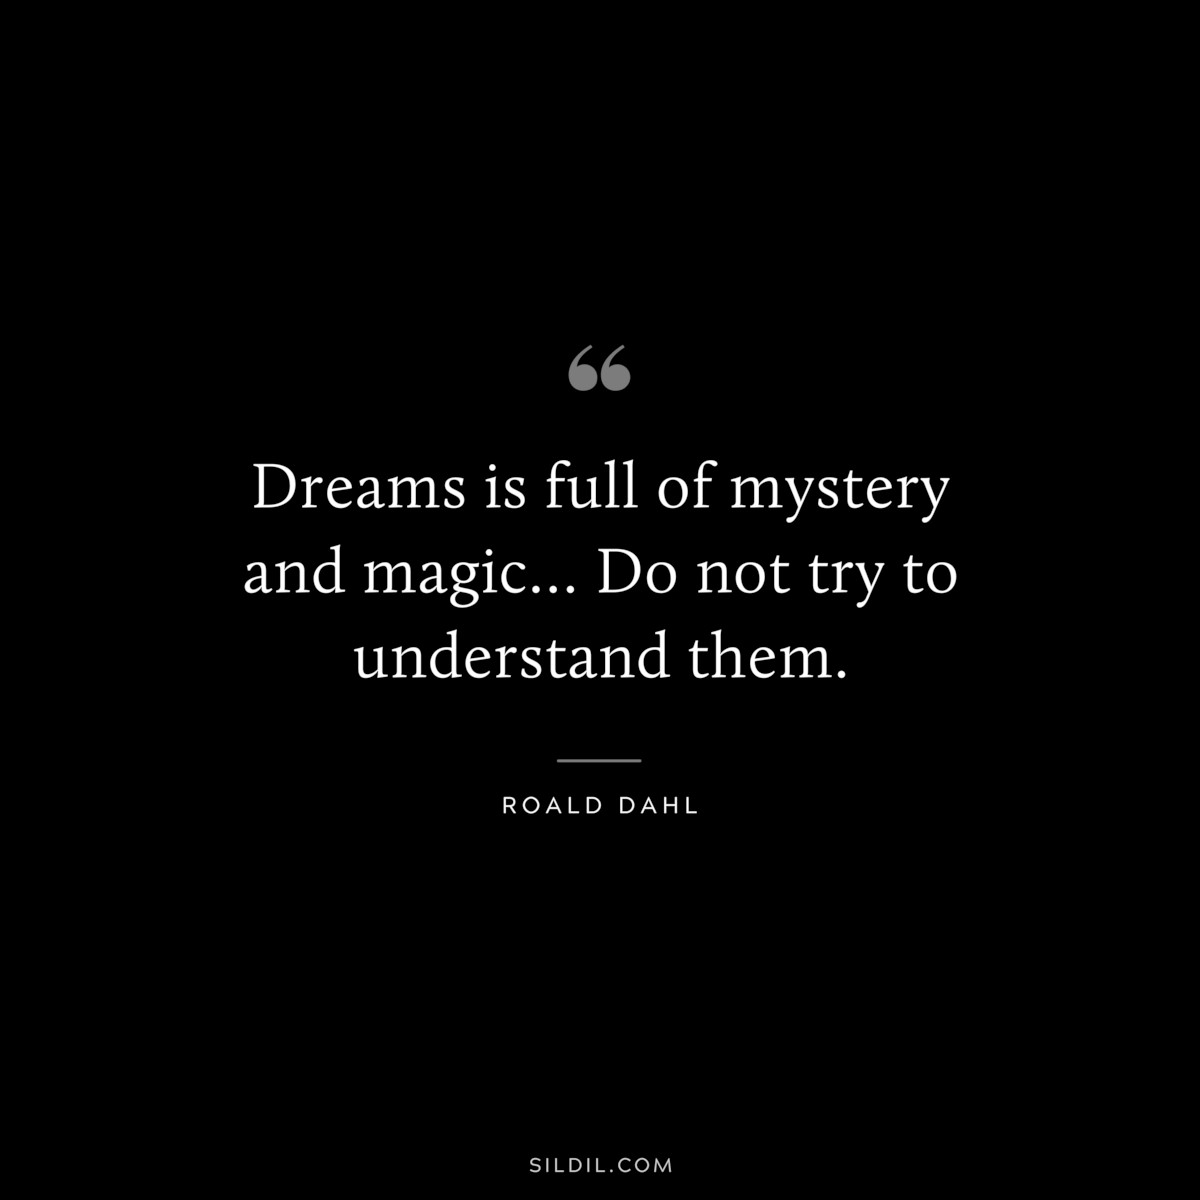 Dreams is full of mystery and magic… Do not try to understand them. ― Roald Dahl